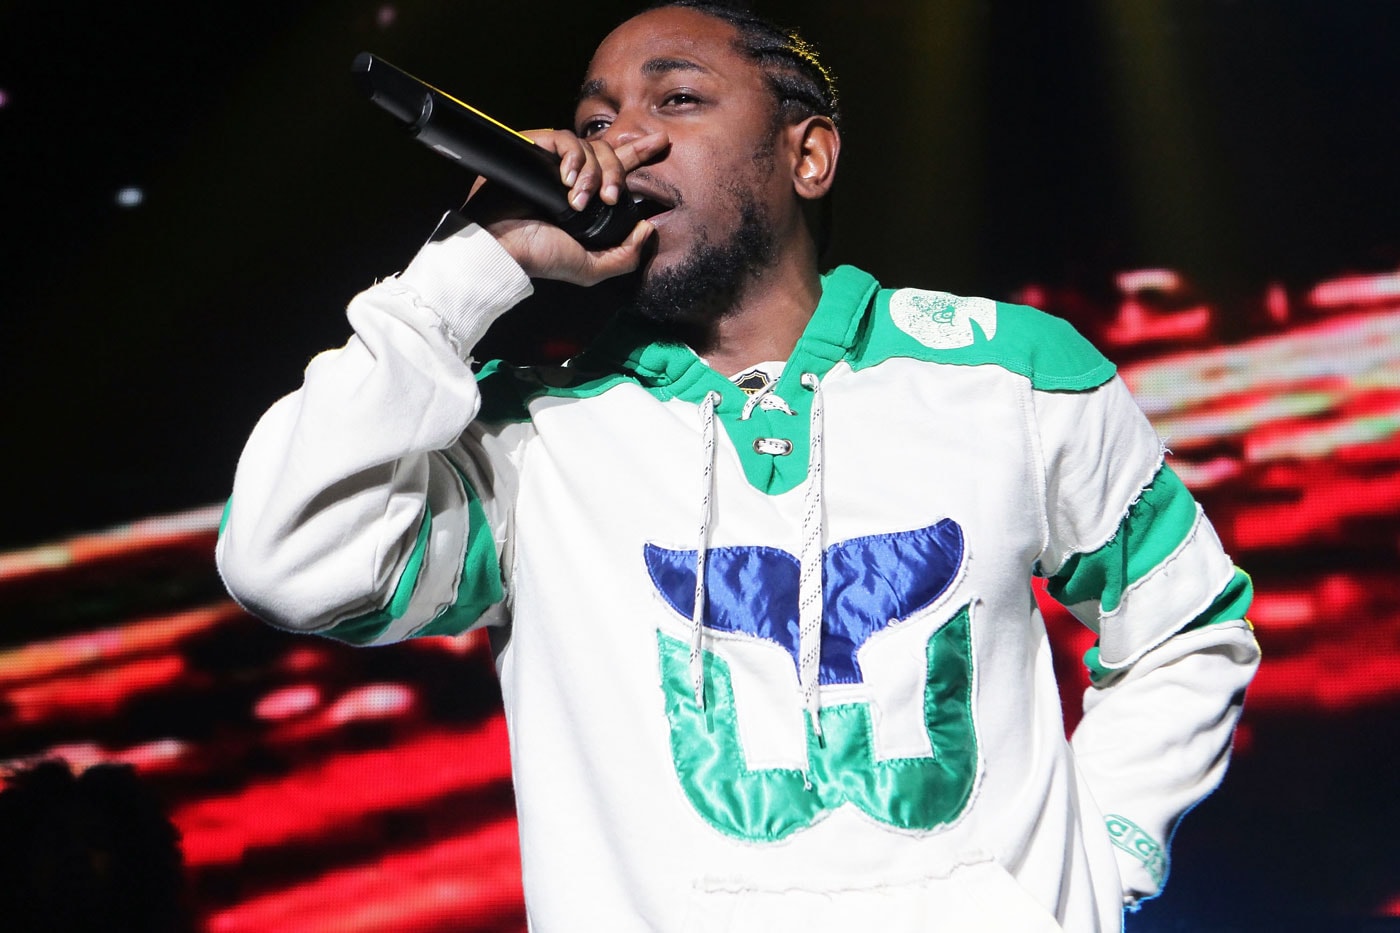 Kendrick Lamar, A$AP Rocky & Snoop Dogg Join Miguel on Stage